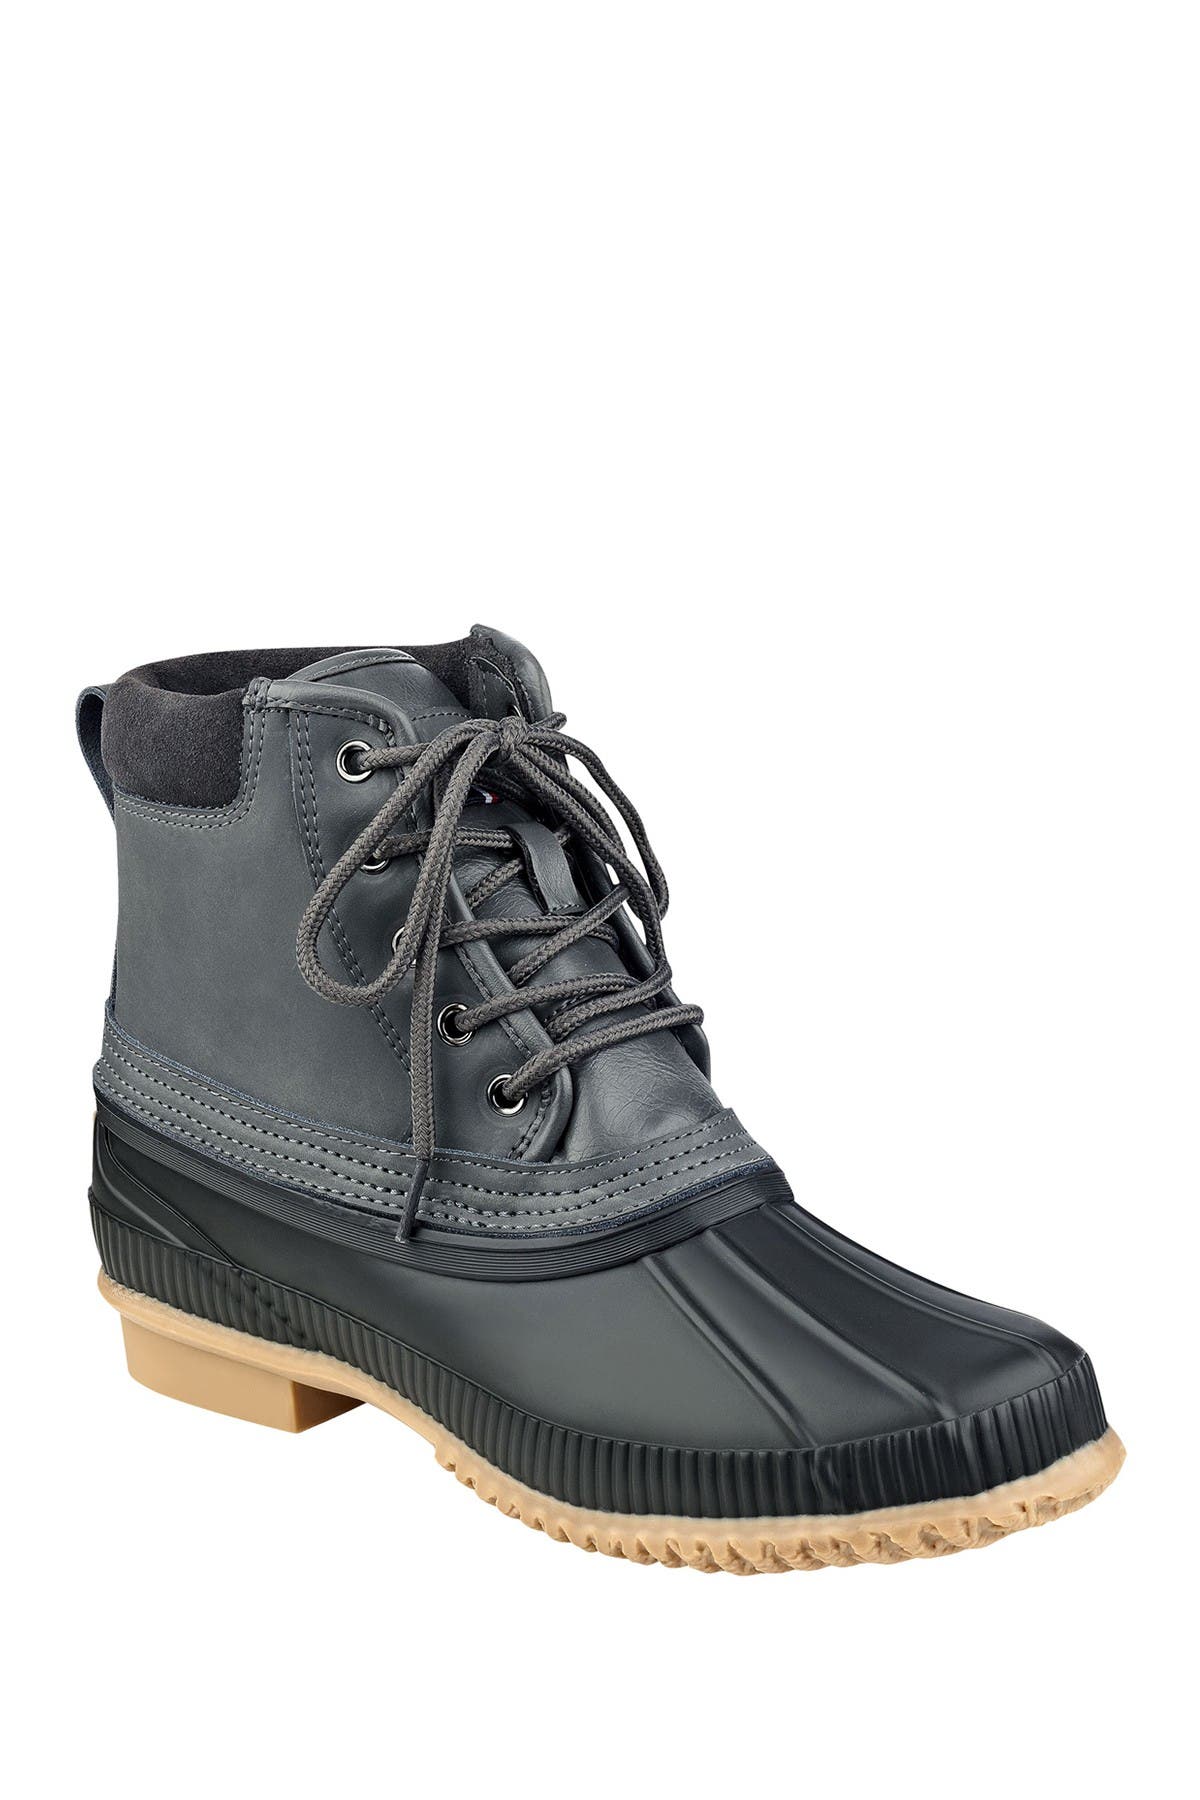 tommy hilfiger casey duck boots